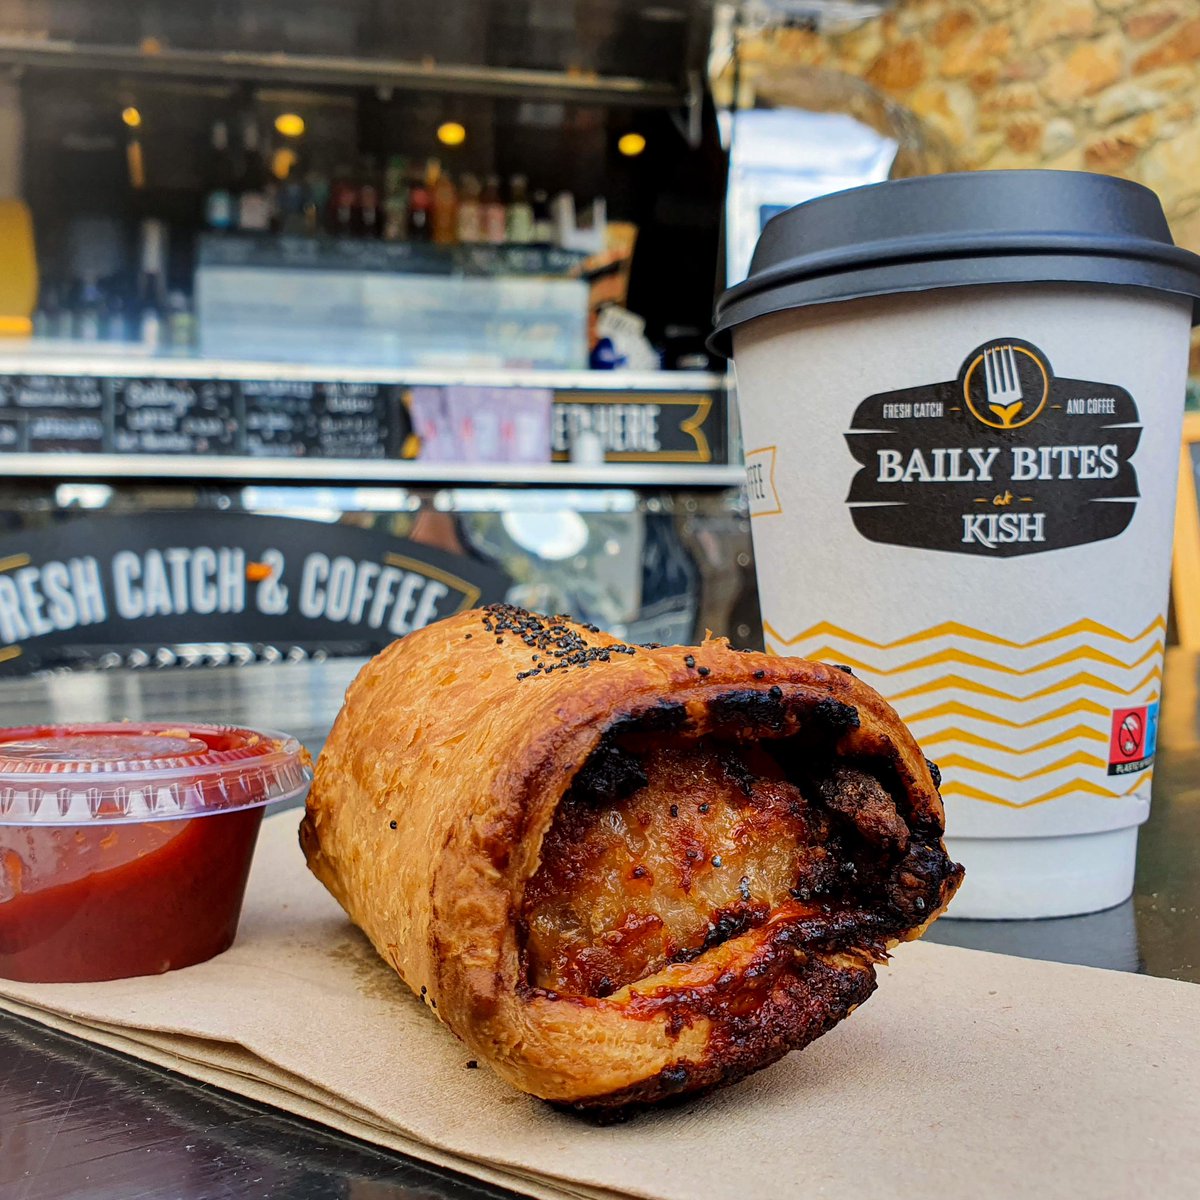 Fancy a bite?
Try our sausage rolls 😋

Perfect light bite to finish off a walk around Howth

Stop by baily bites and try one yourself.

We're open 10am - 5pm

#lunch #bailybites #bailyandkish #howth #howthcliffwalk #veggie #snack #lightbites #sausagerolls